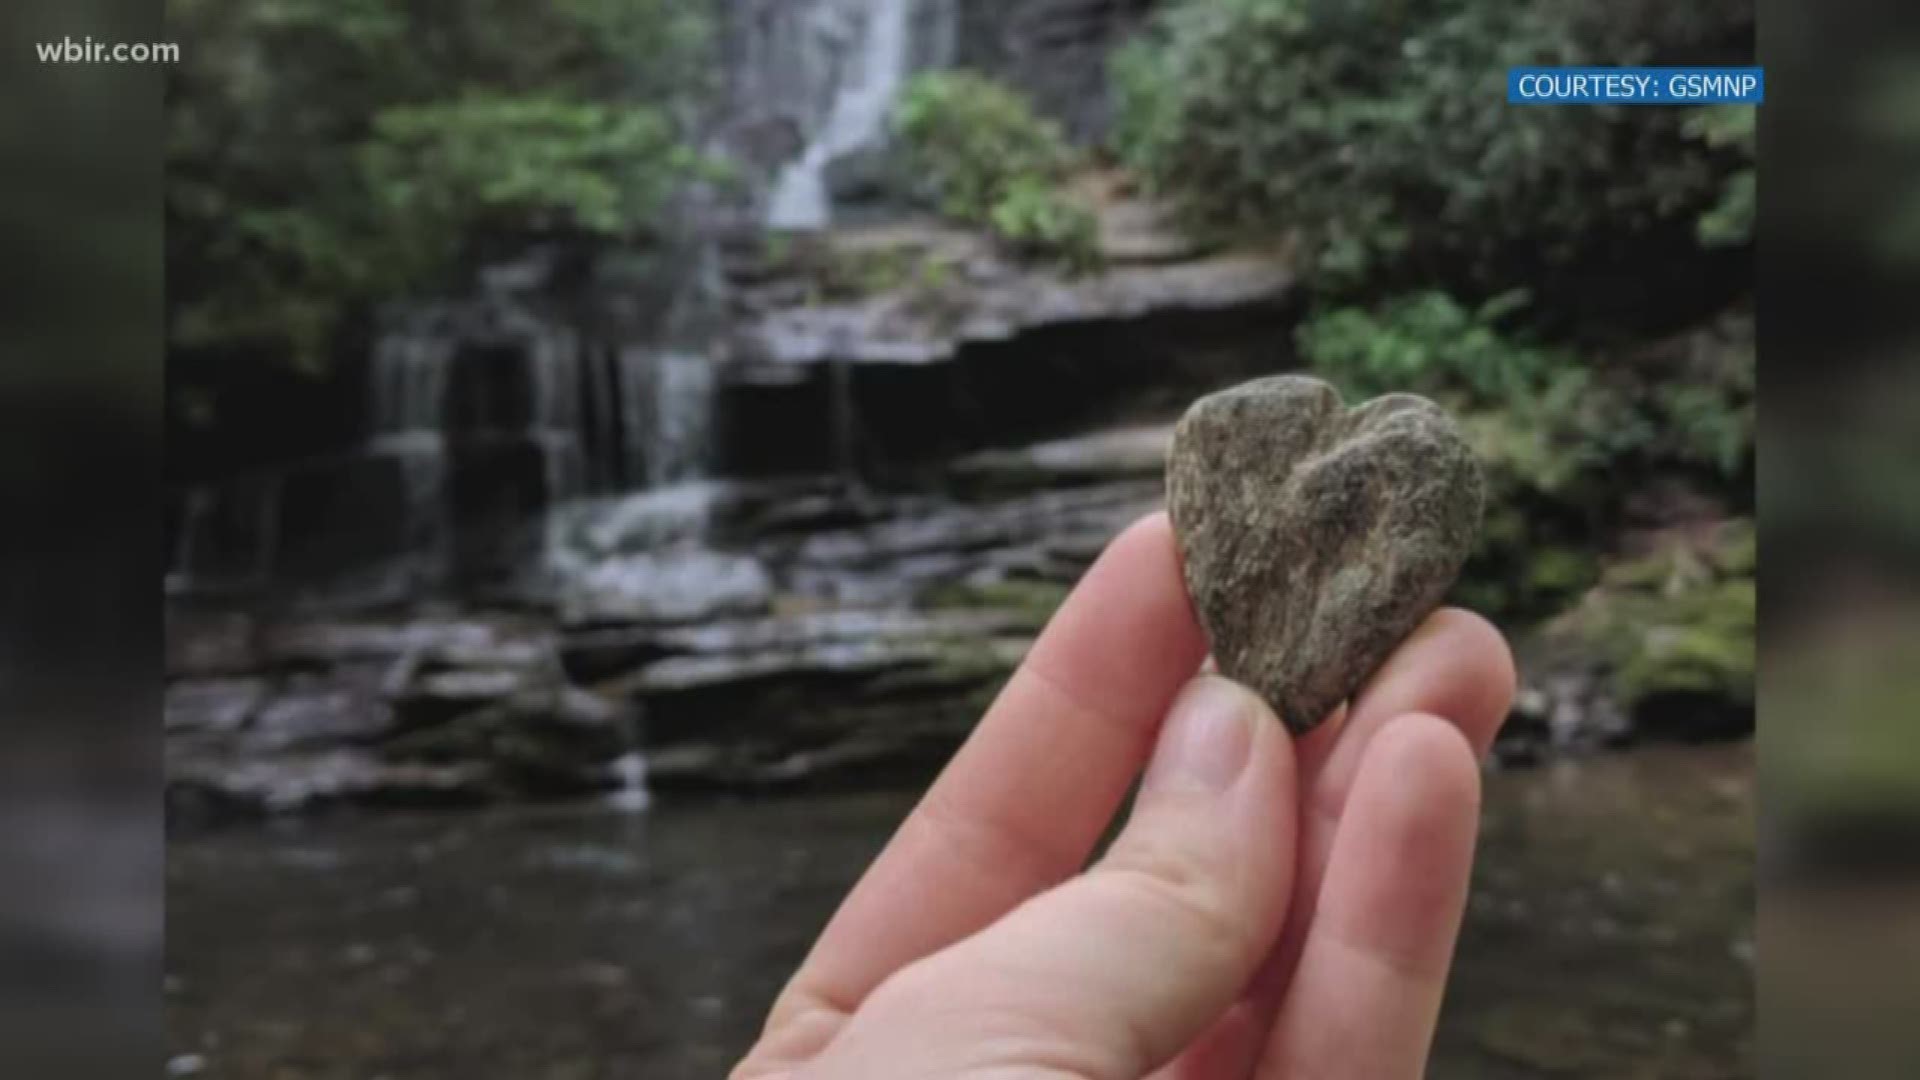 Removing something like a rock from the Great Smoky Mountains National Park is not allowed, and when one young visitor found out, she took action.